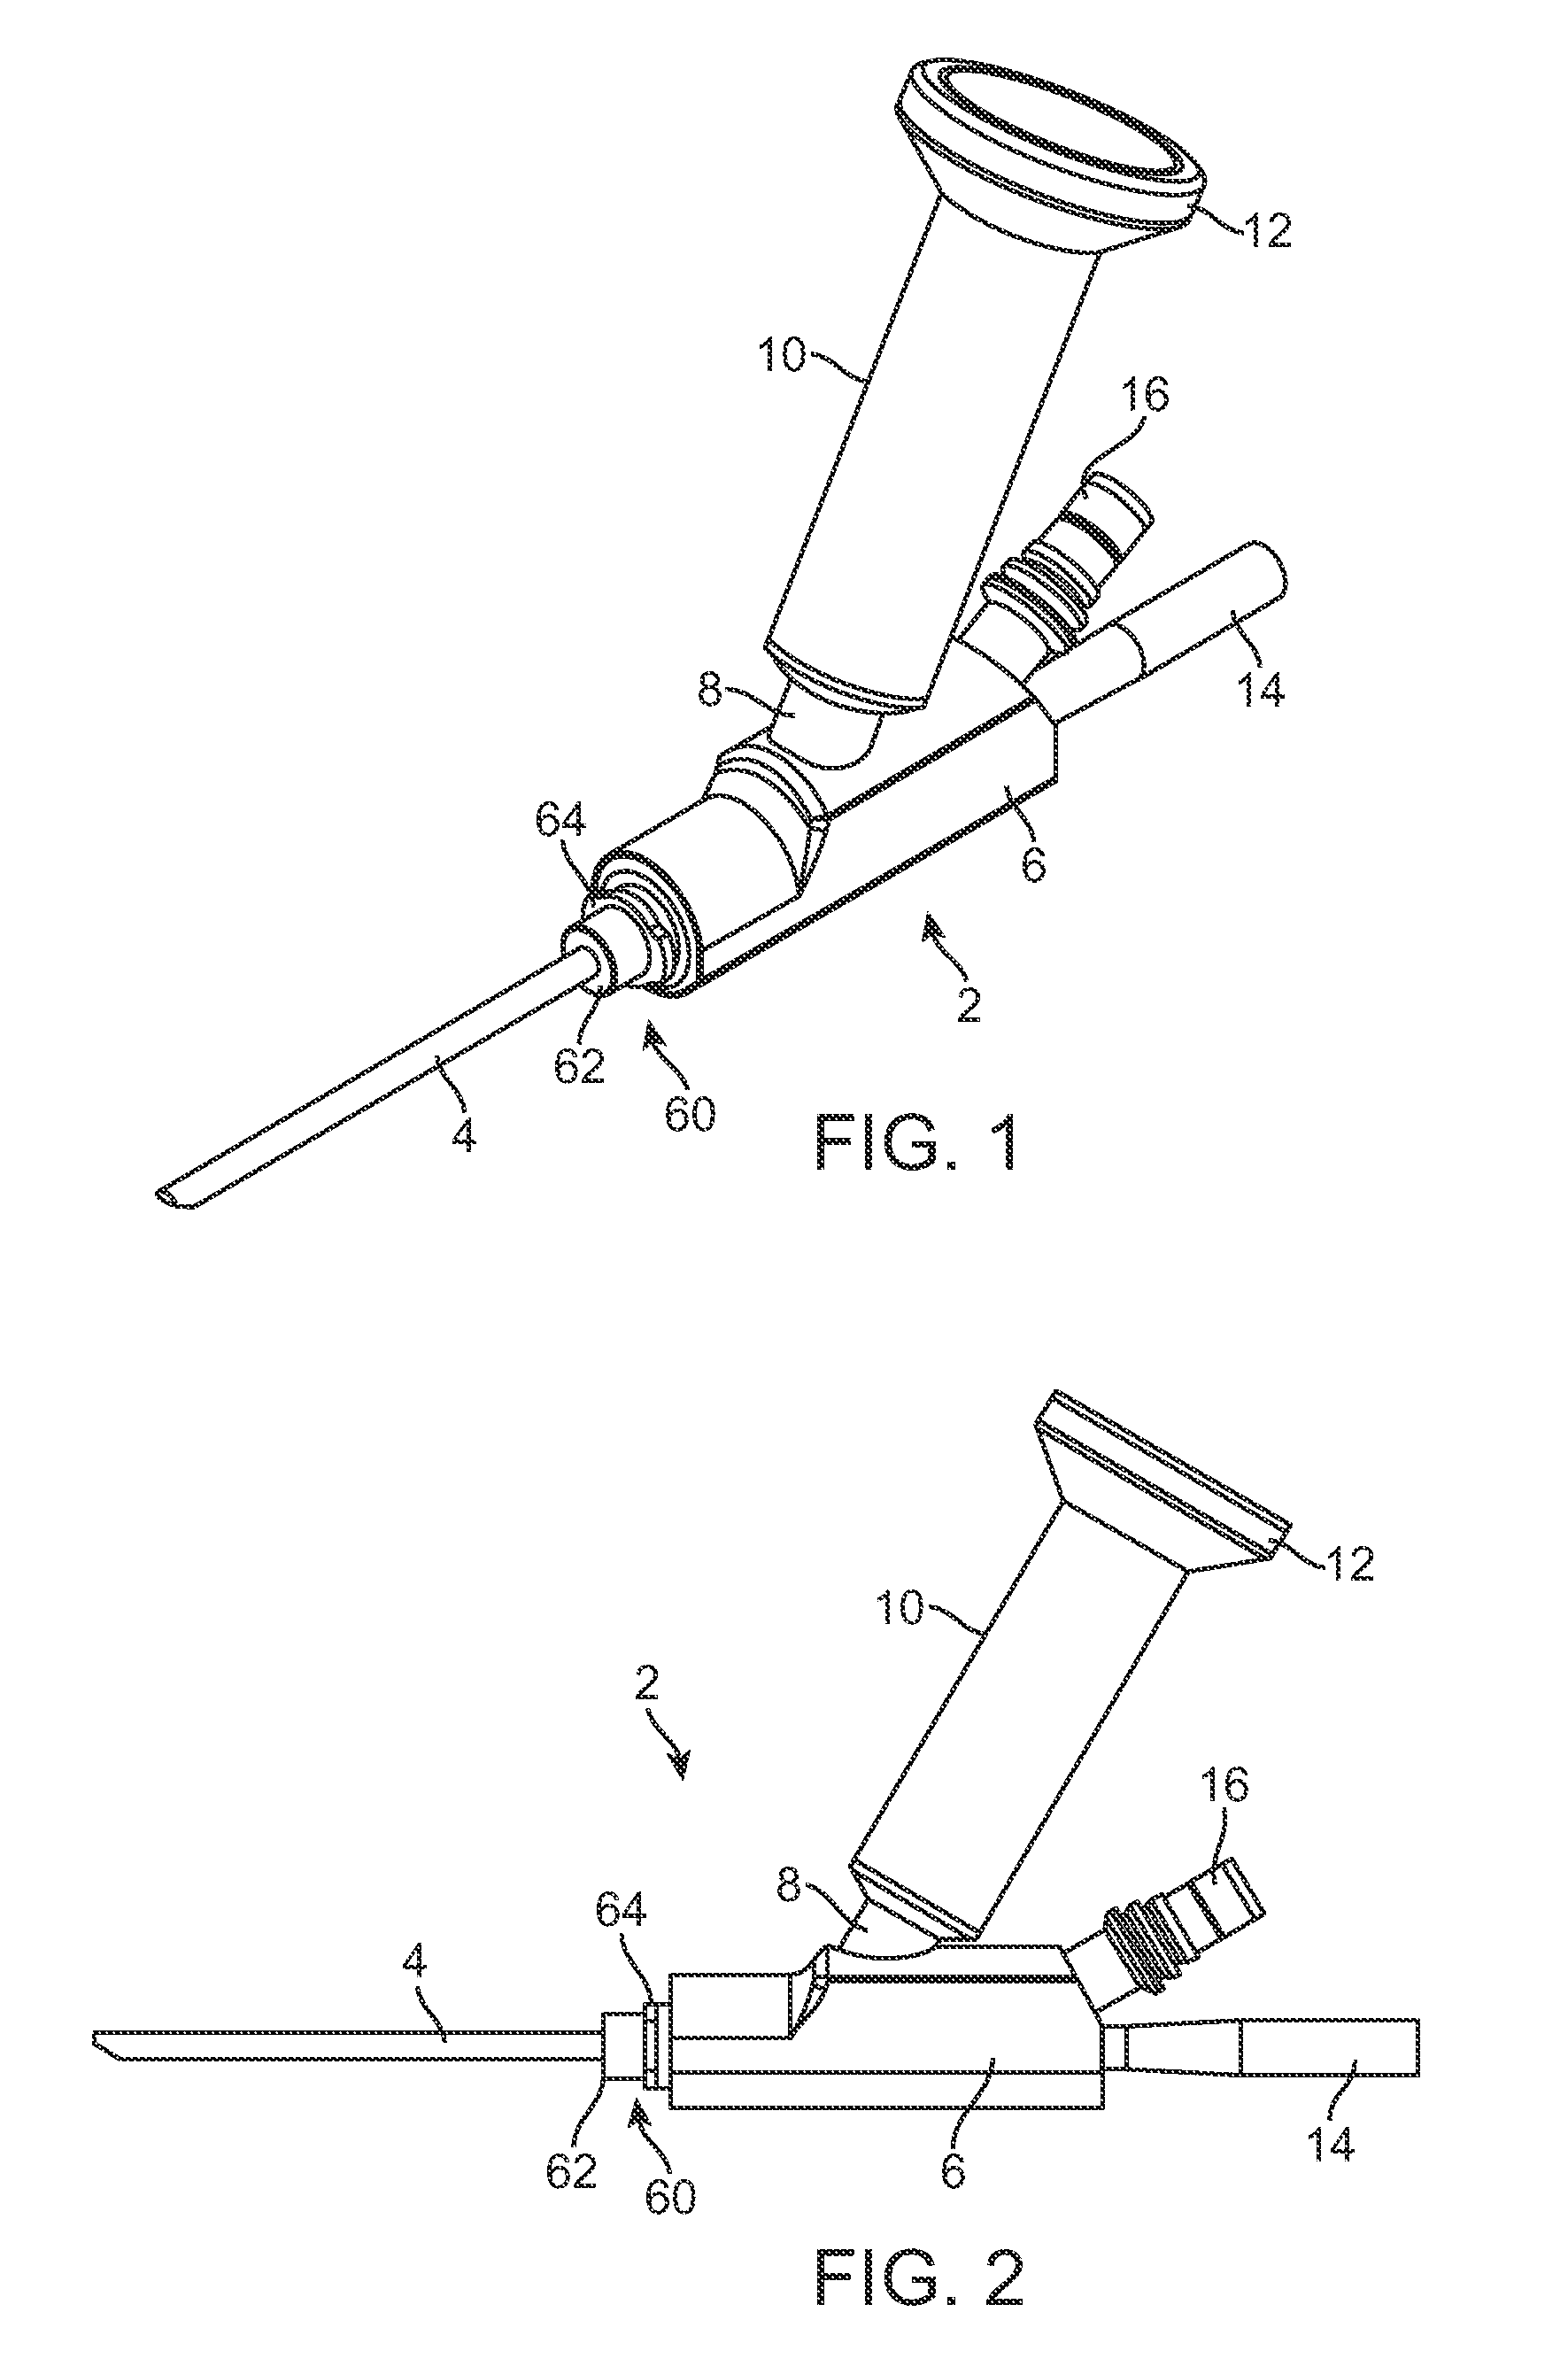 Endoscope system for treatment of sinusitis